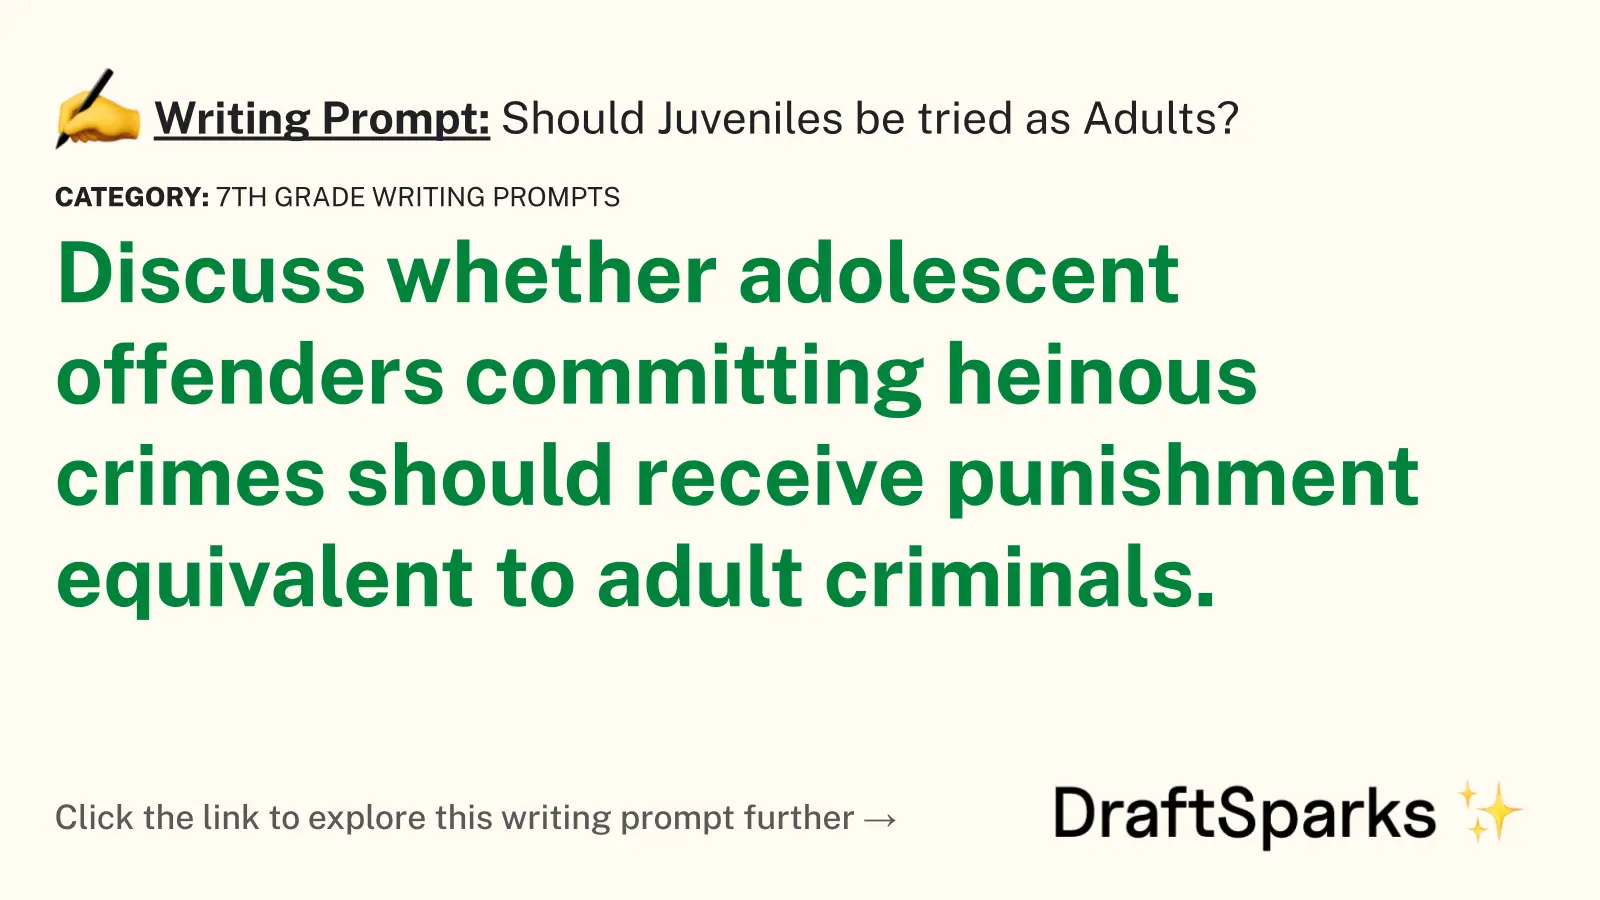 Should Juveniles be tried as Adults?